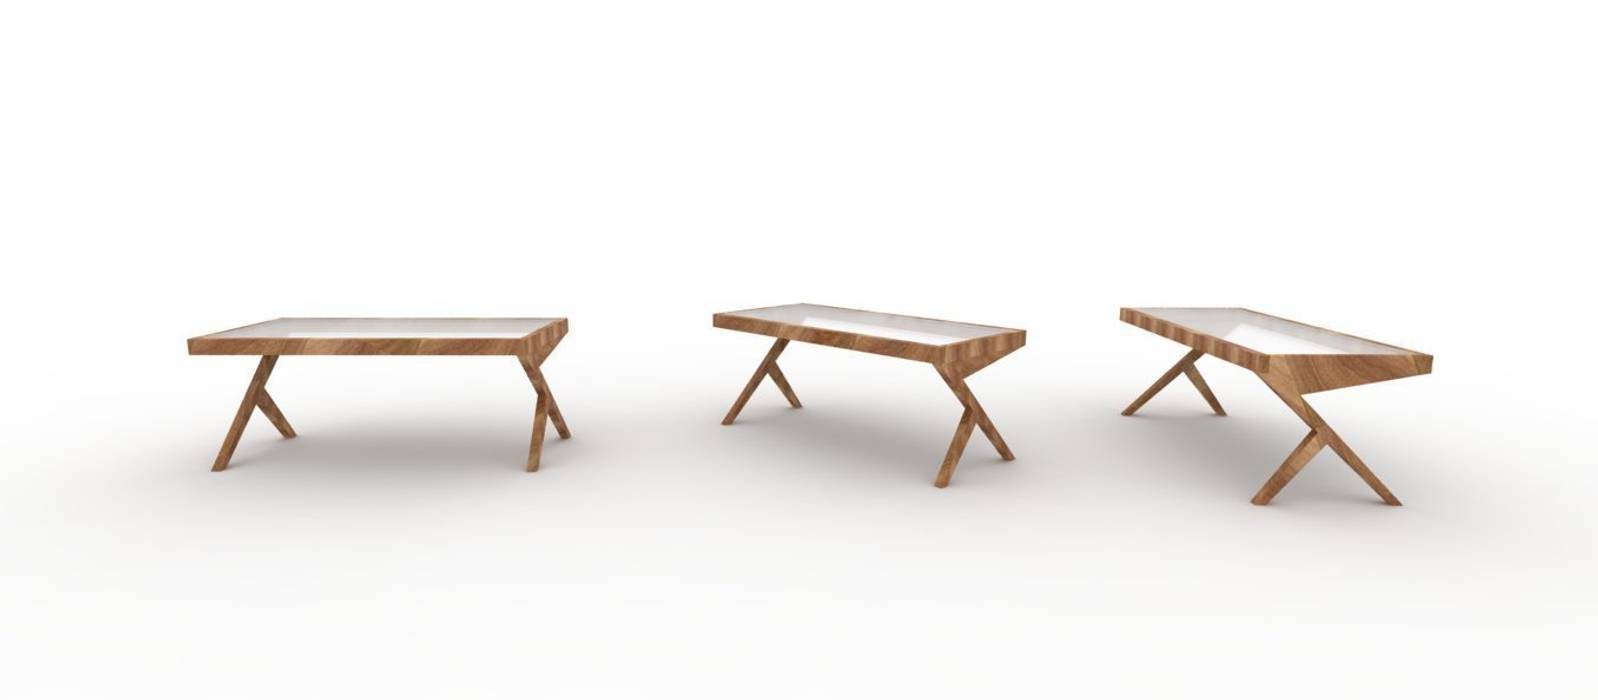 Cris Cross Dining Set, Neotecture Neotecture 餐廳 桌子